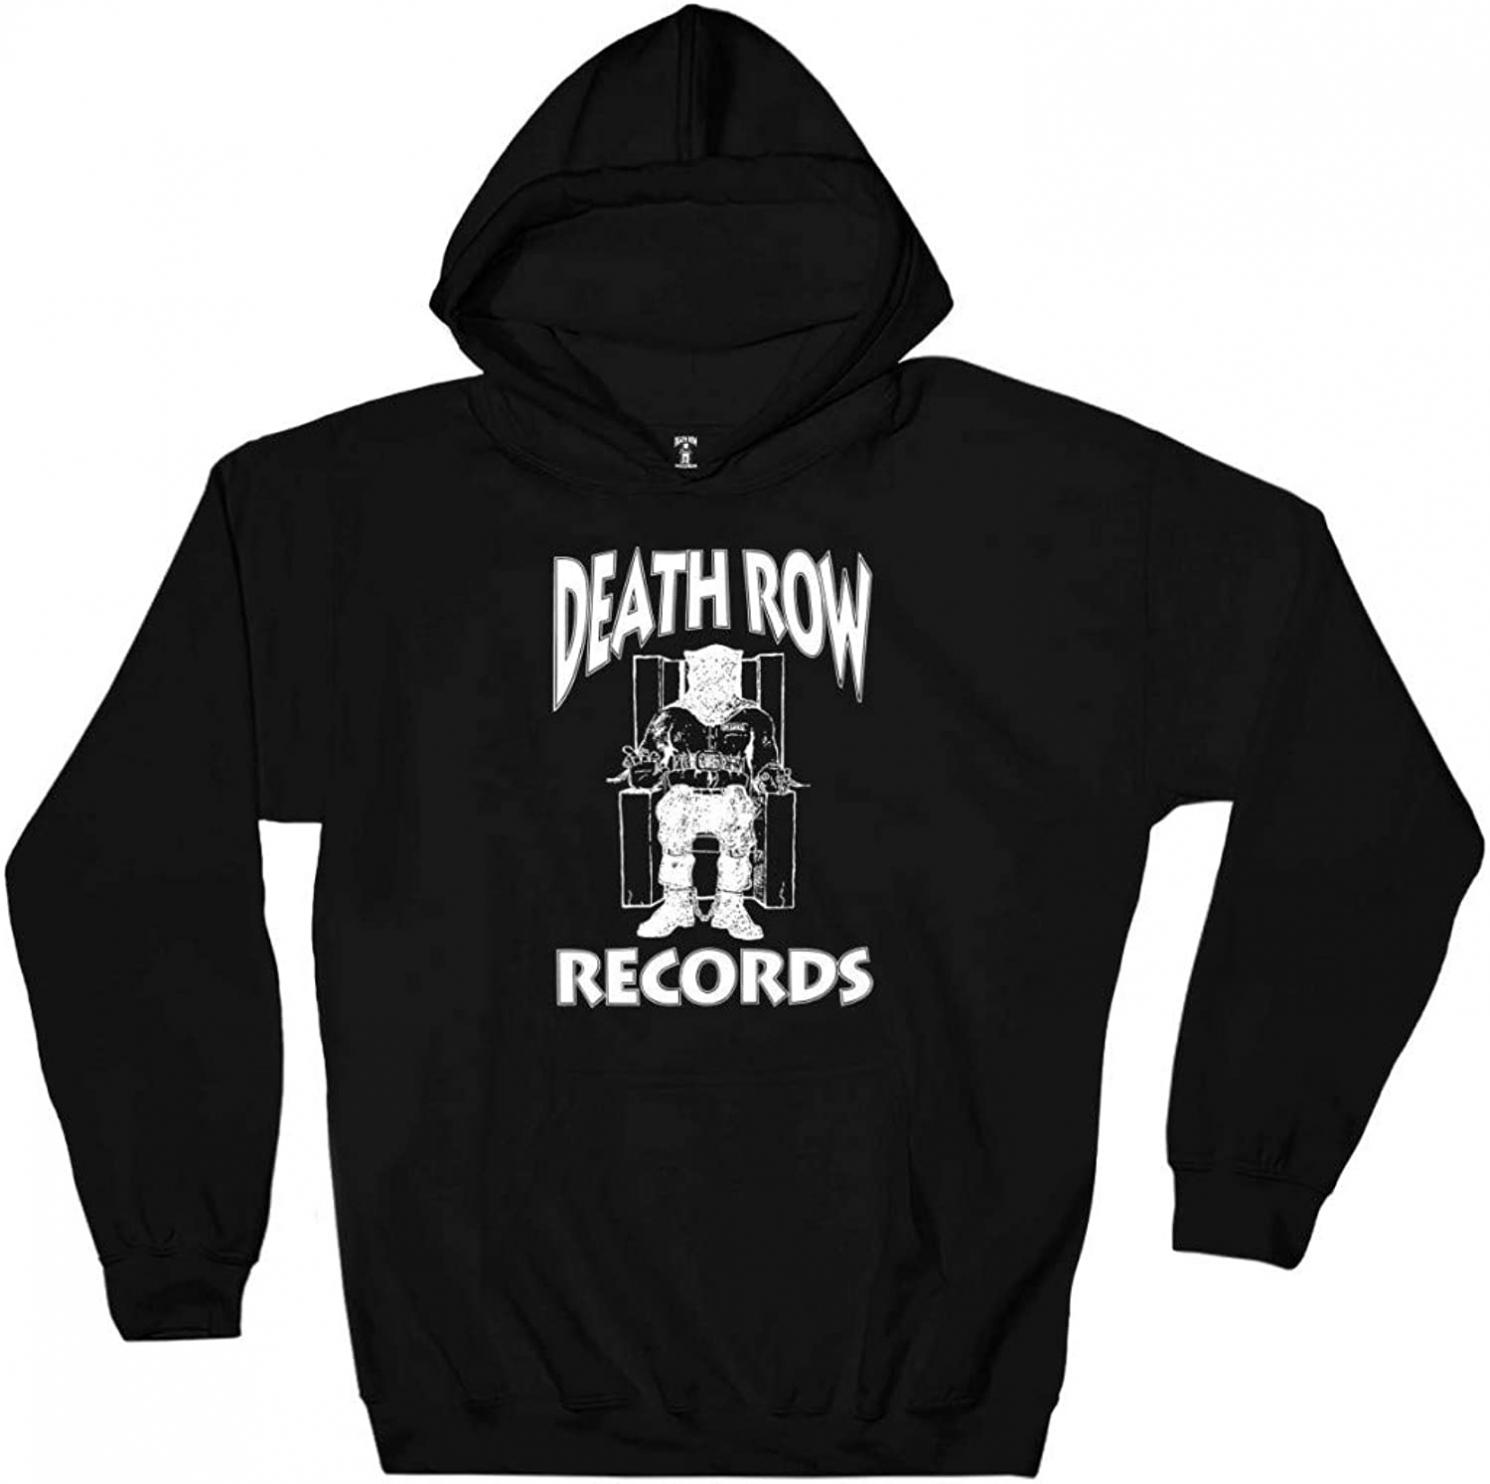 Ripple Junction Death Row Records Electric Chair White Logo Fleece Hooded Sweatshirt for Adult Men or Women